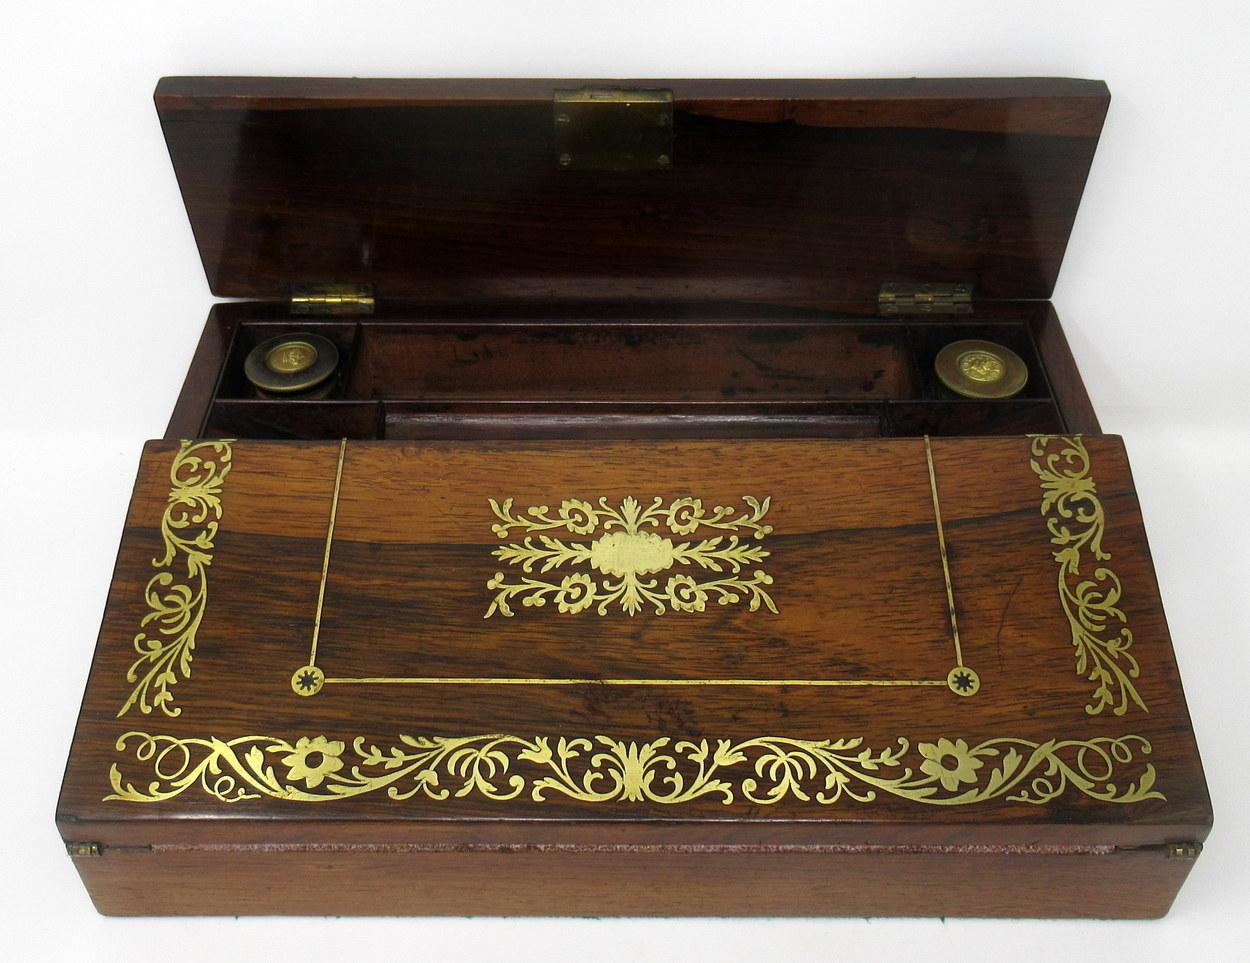 An exquisite example of an early rosewood writing slope of small proportions of English origin, circa first half of the 19th century probably French or English regency period.

The entire main area with lavish brass inlay on well figured rosewood